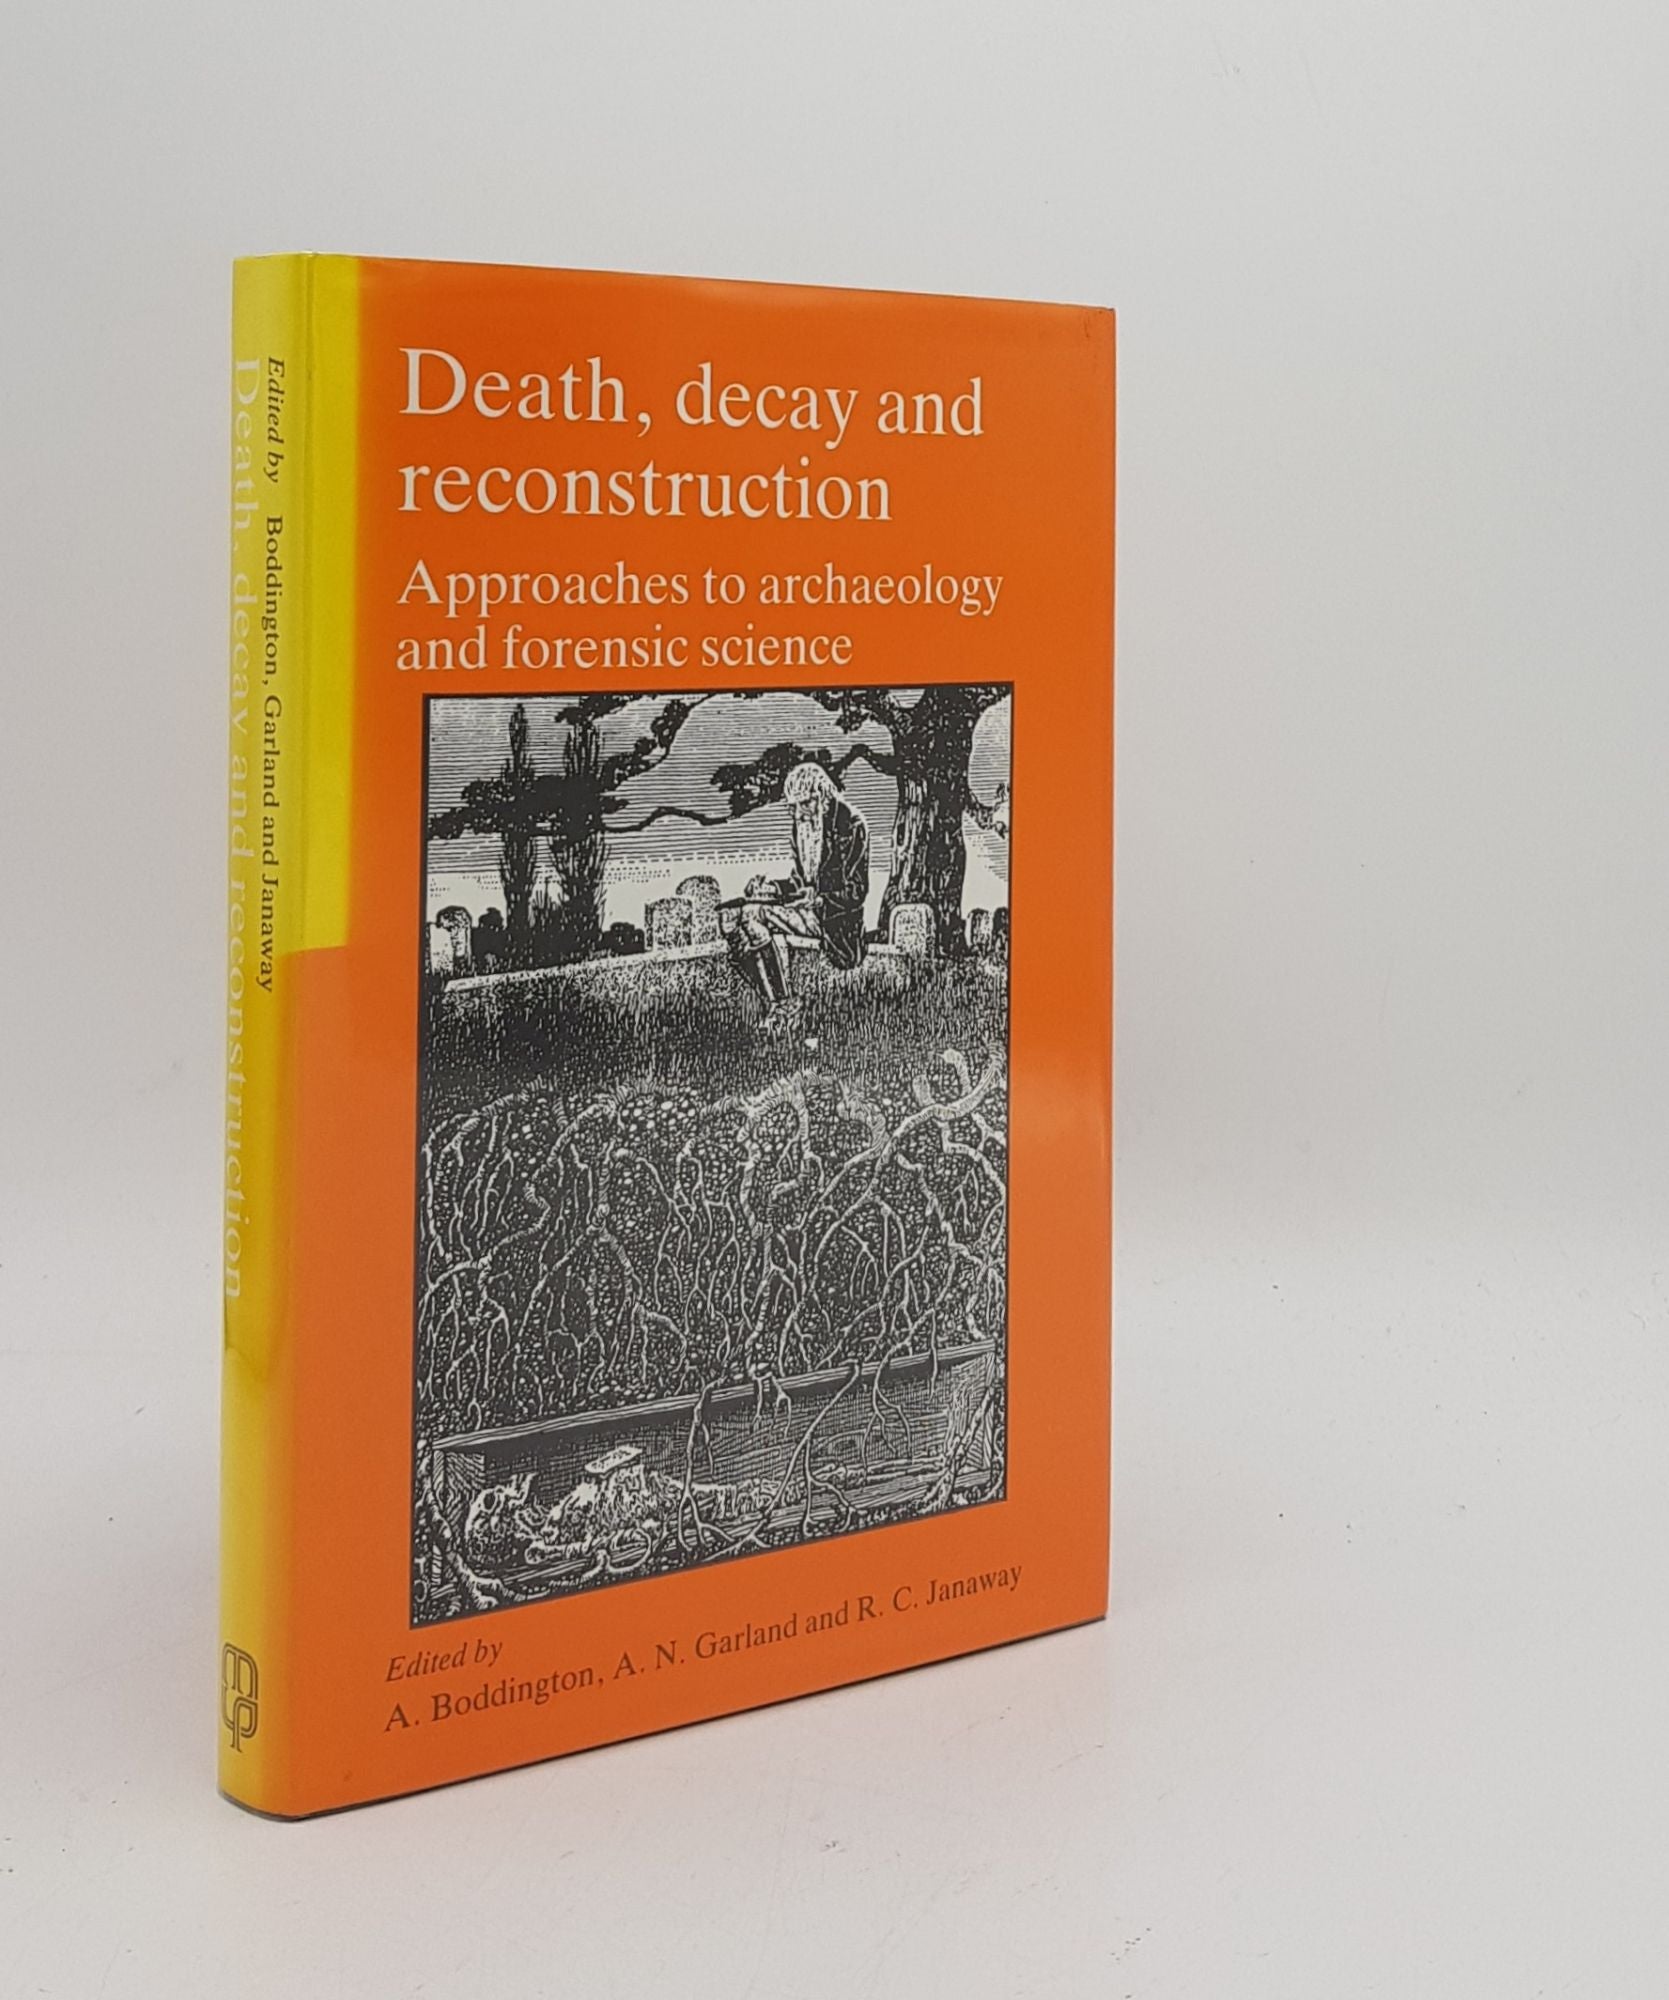 BODDINGTON A., GARLAND A.N., JANAWAY R.C. - Death Decay and Reconstruction Approaches to Archaeology and Forensic Science